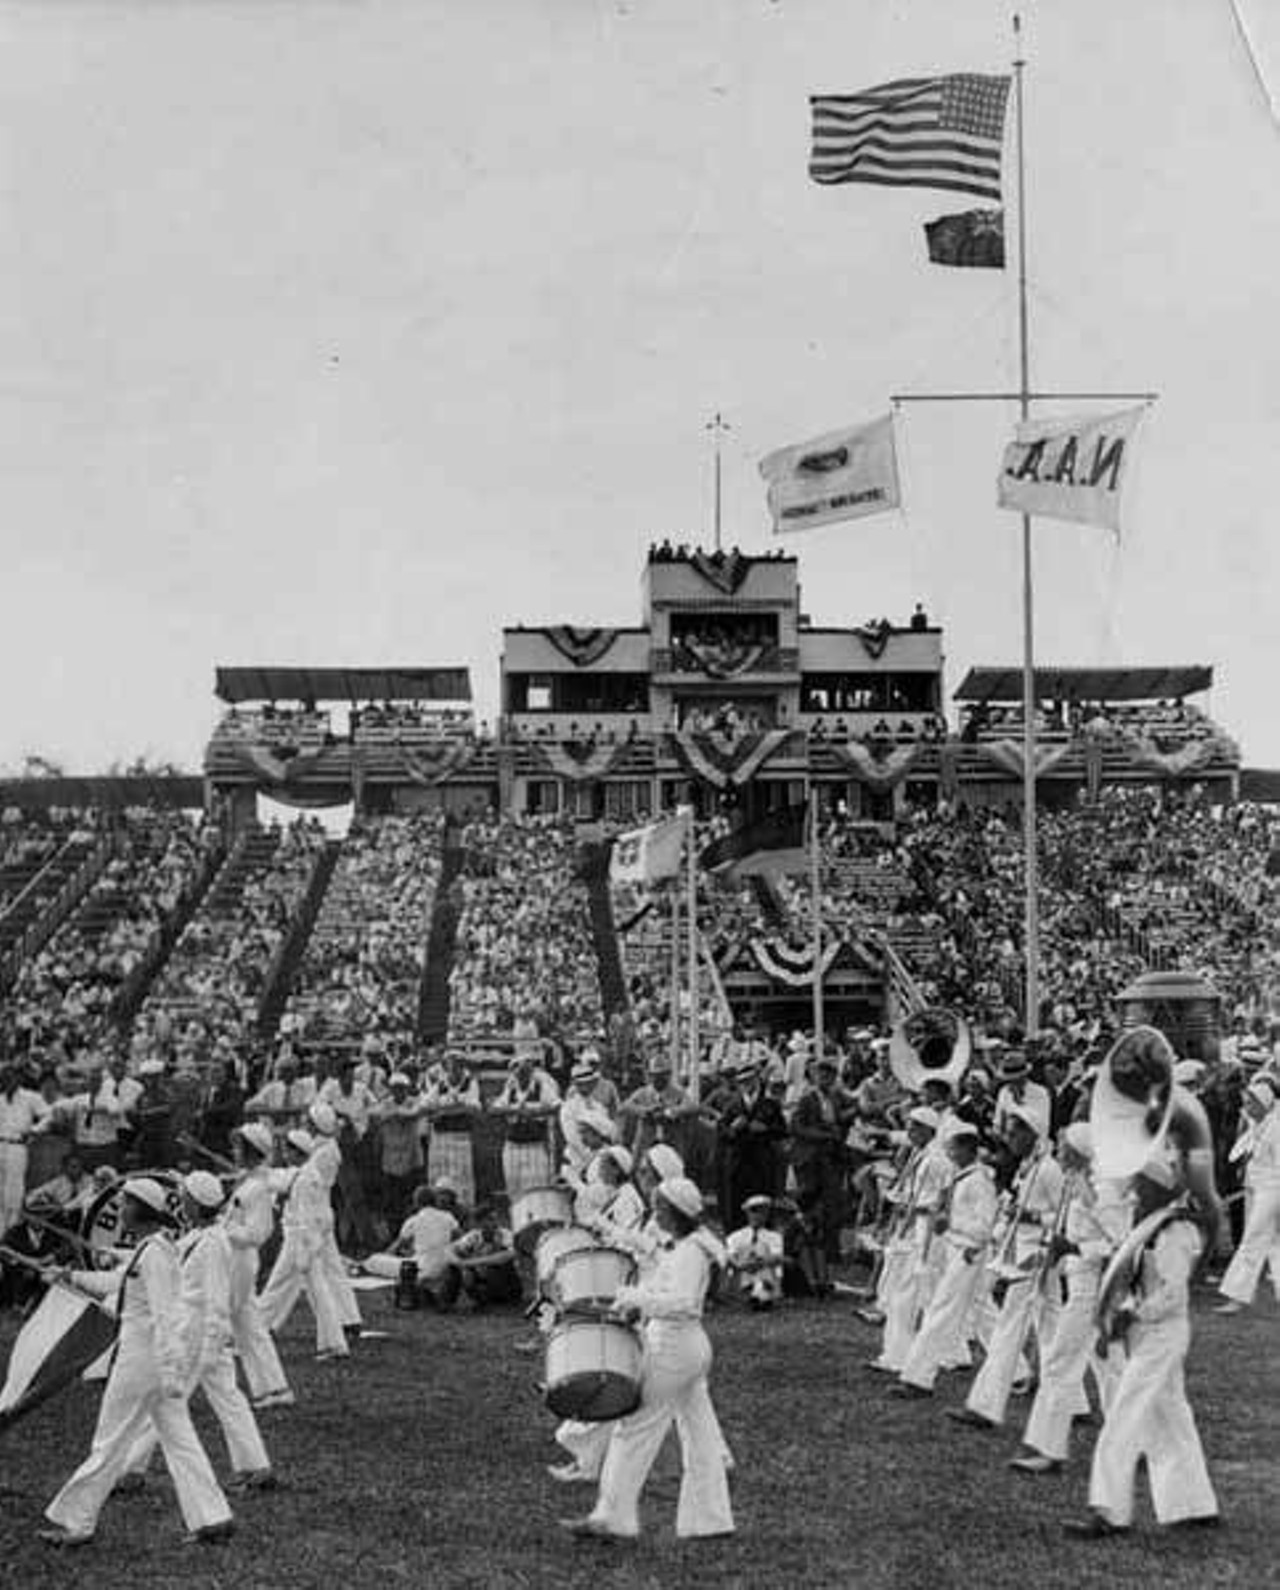 Band performing at the National Air Races, 1932